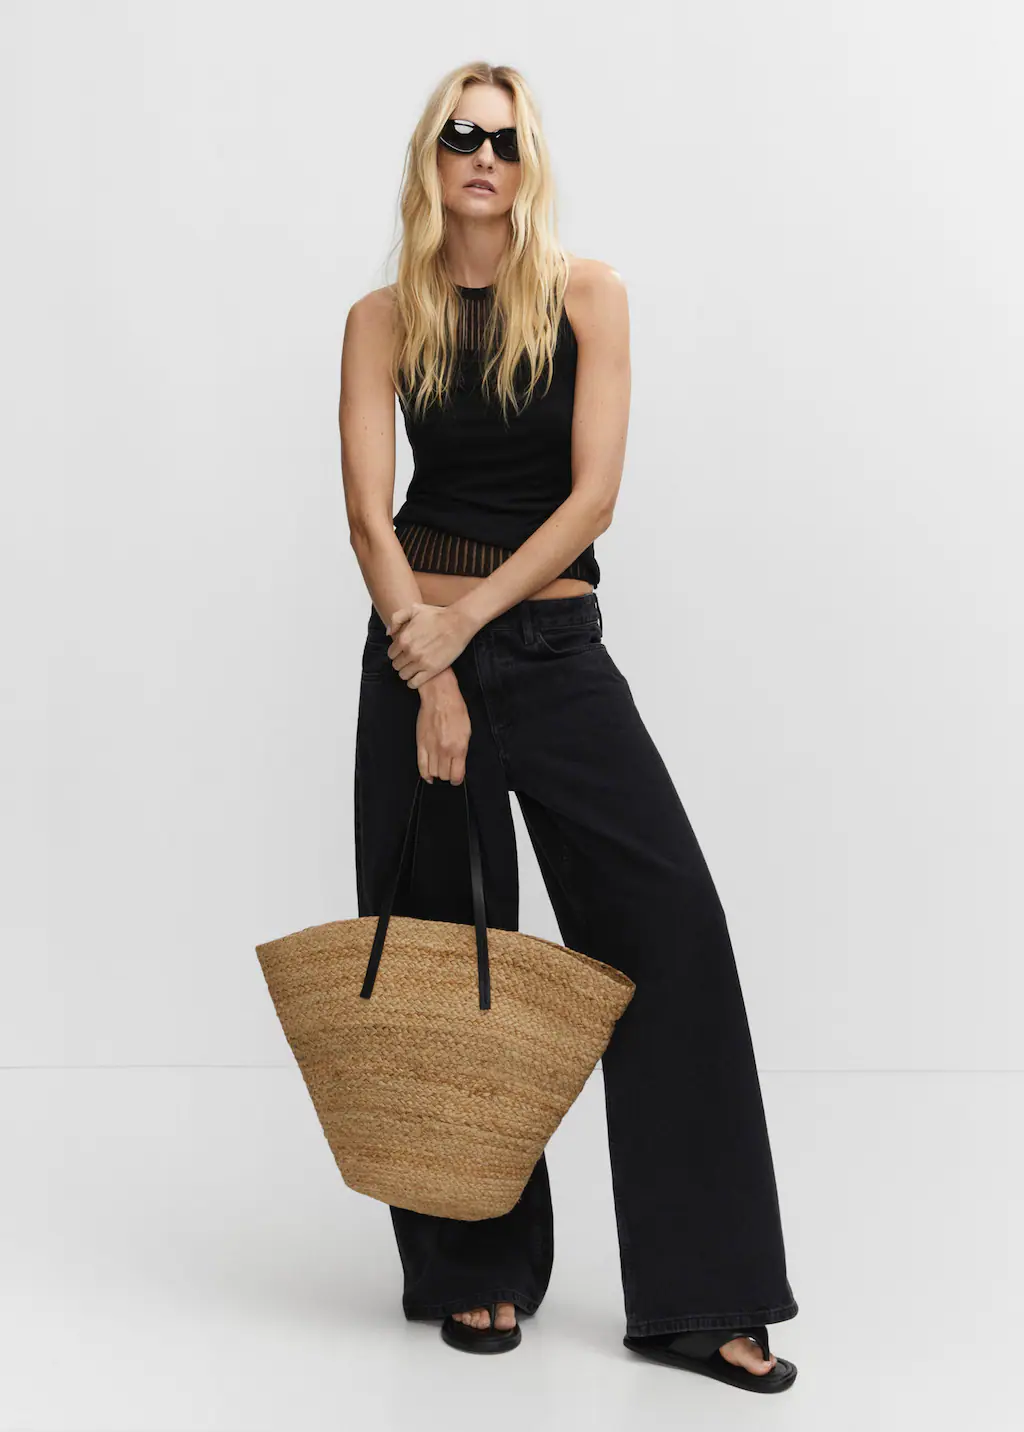 28 Best Basket Bags (Vintage and Current) for a Timeless Summer Look